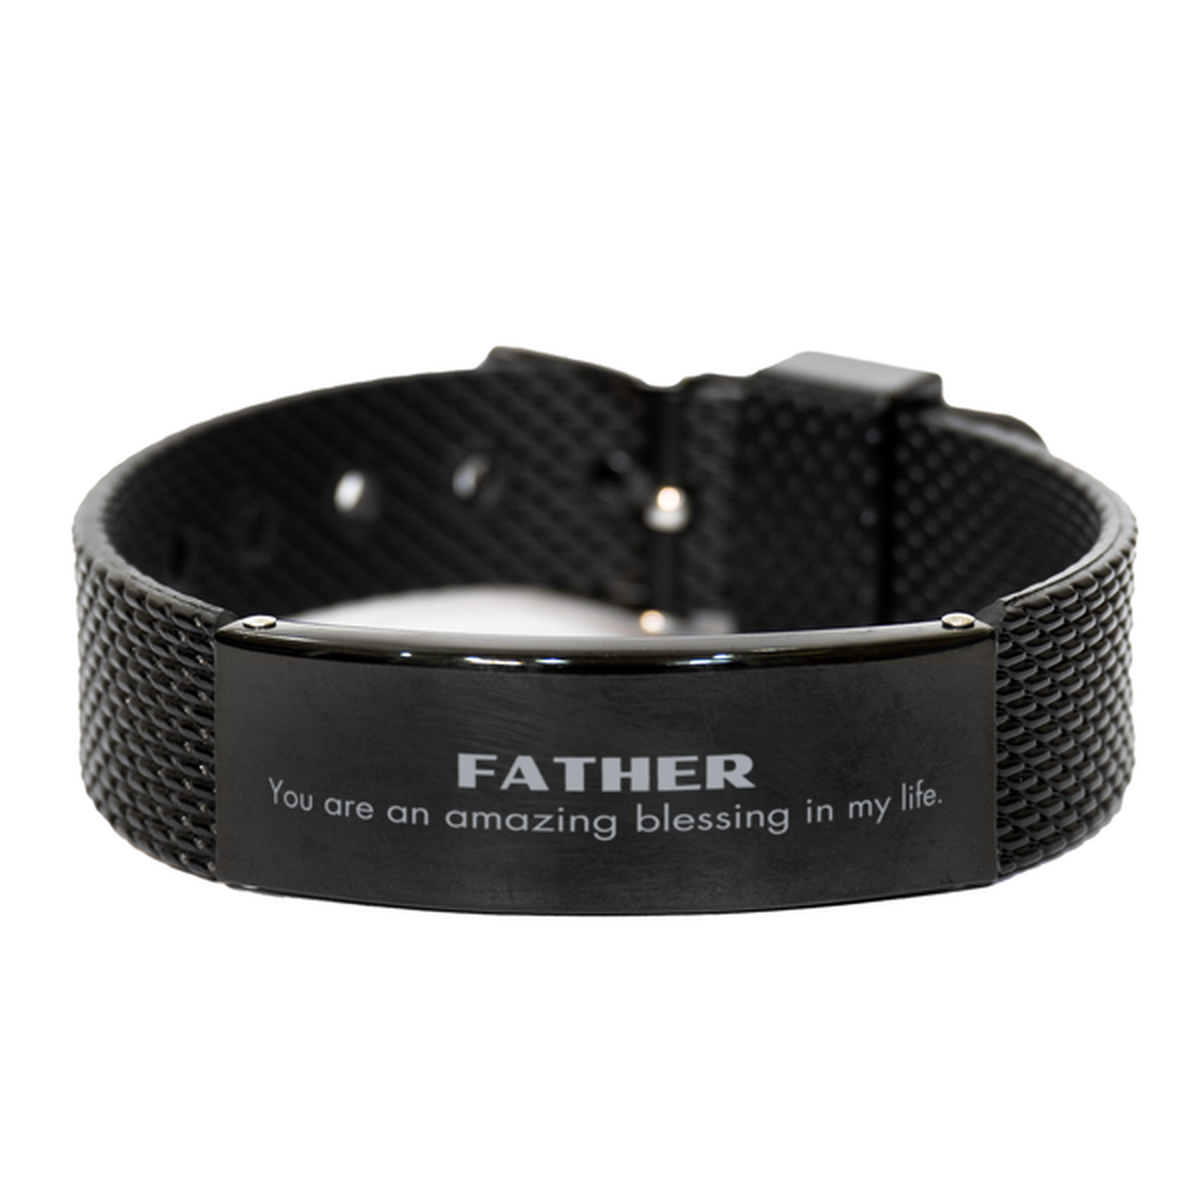 Father Black Shark Mesh Bracelet, You are an amazing blessing in my life, Thank You Gifts For Father, Inspirational Birthday Christmas Unique Gifts For Father